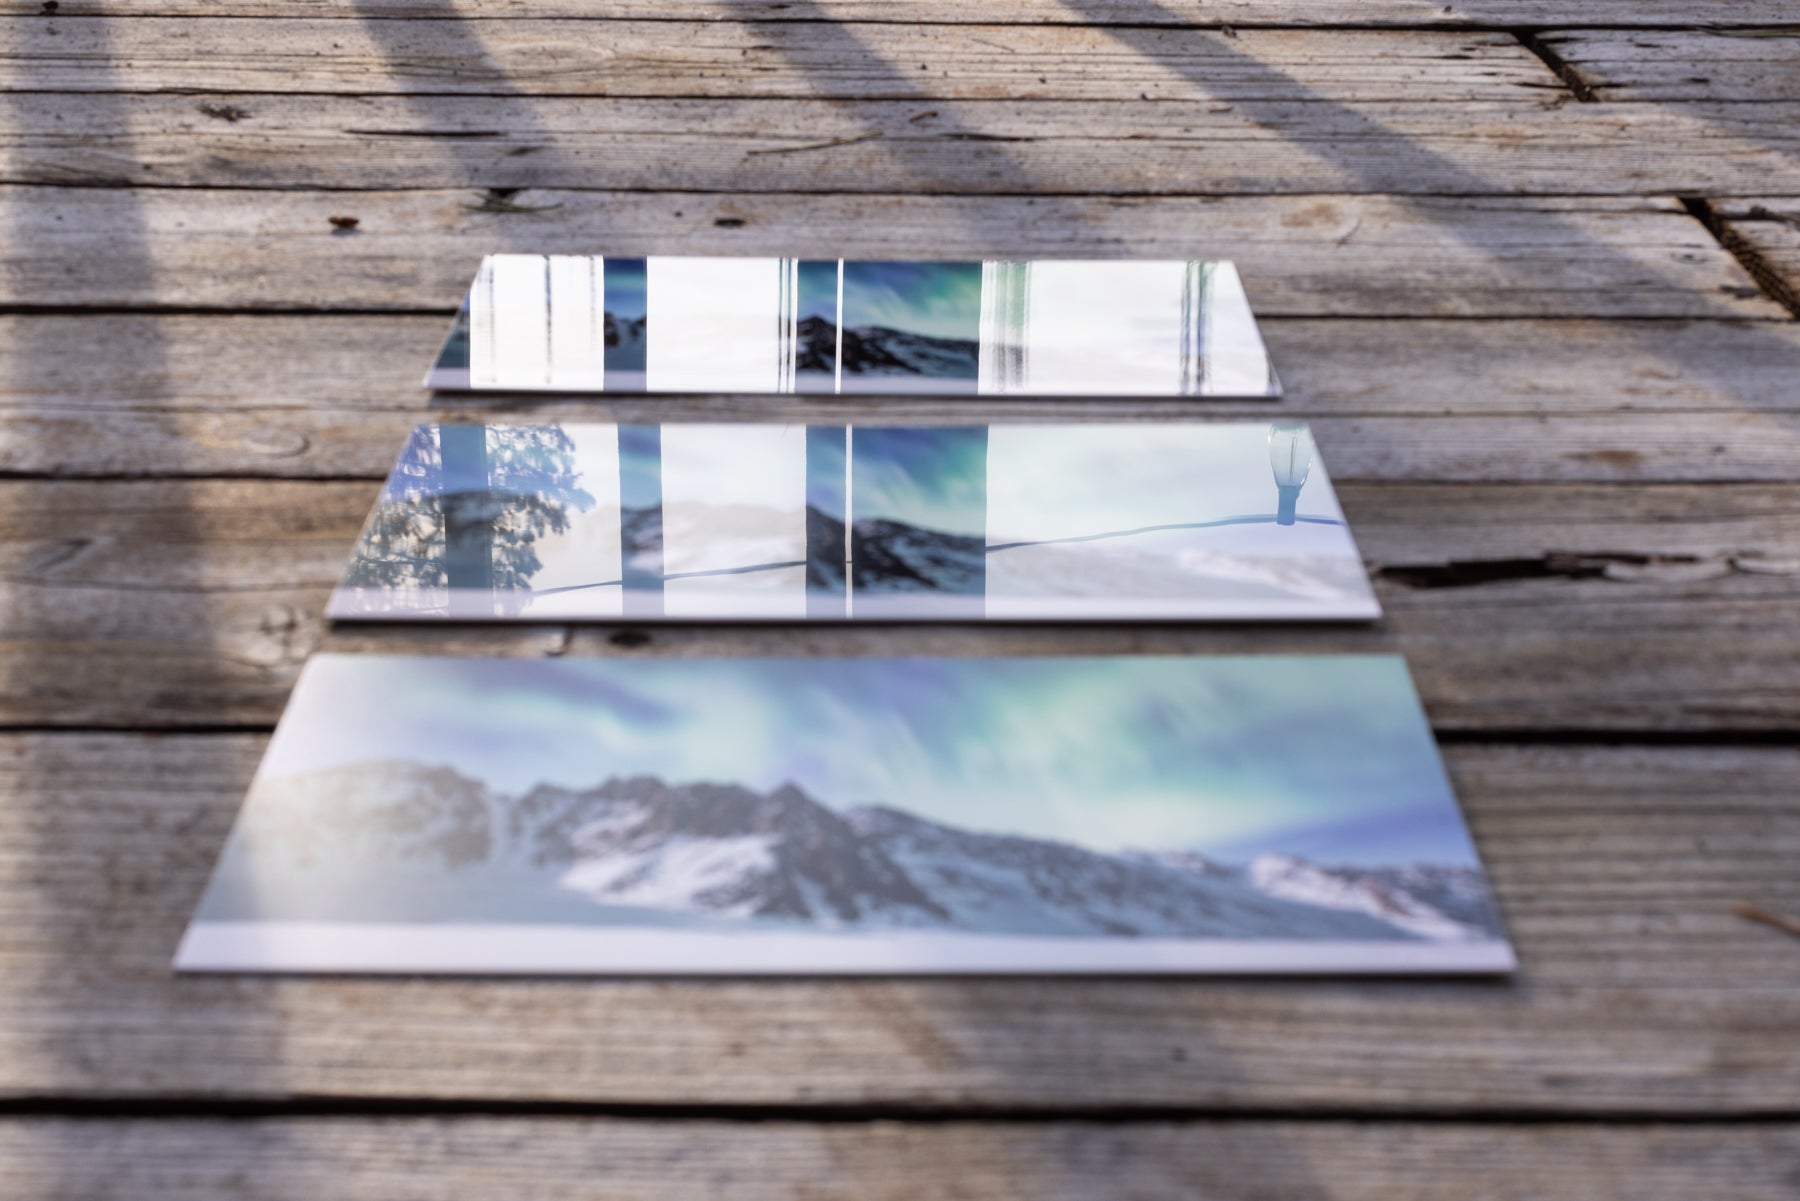 Three fine art photography prints lay on a wooden deck.